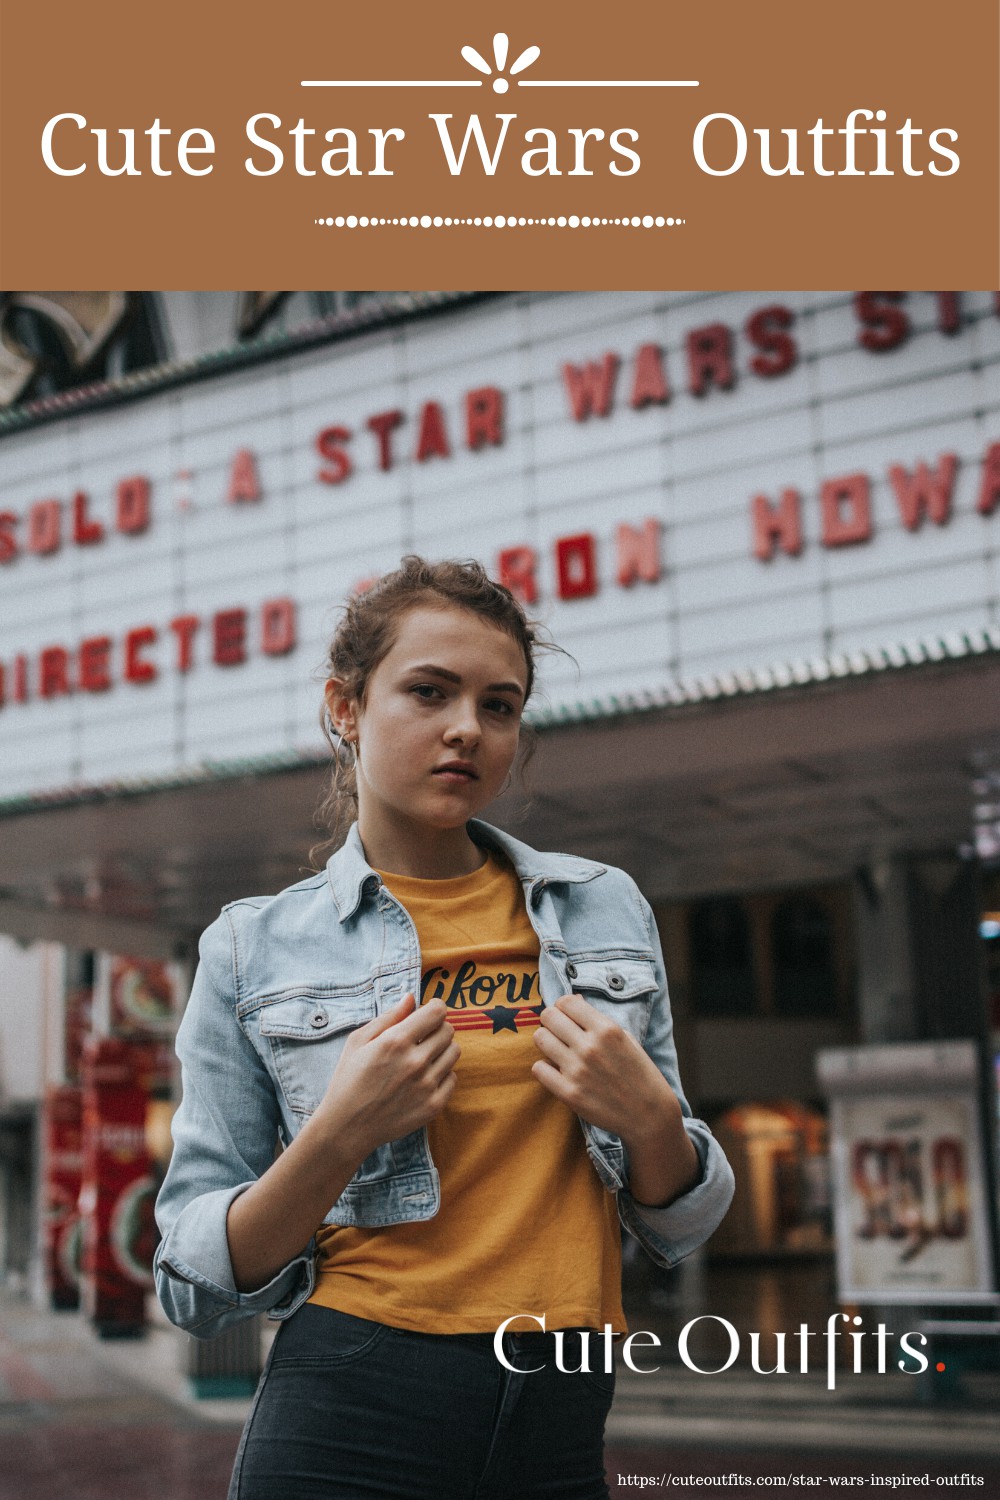 placard | 13 Star Wars Inspired Outfits You Can Wear That Aren't Cosplay [With Pics]